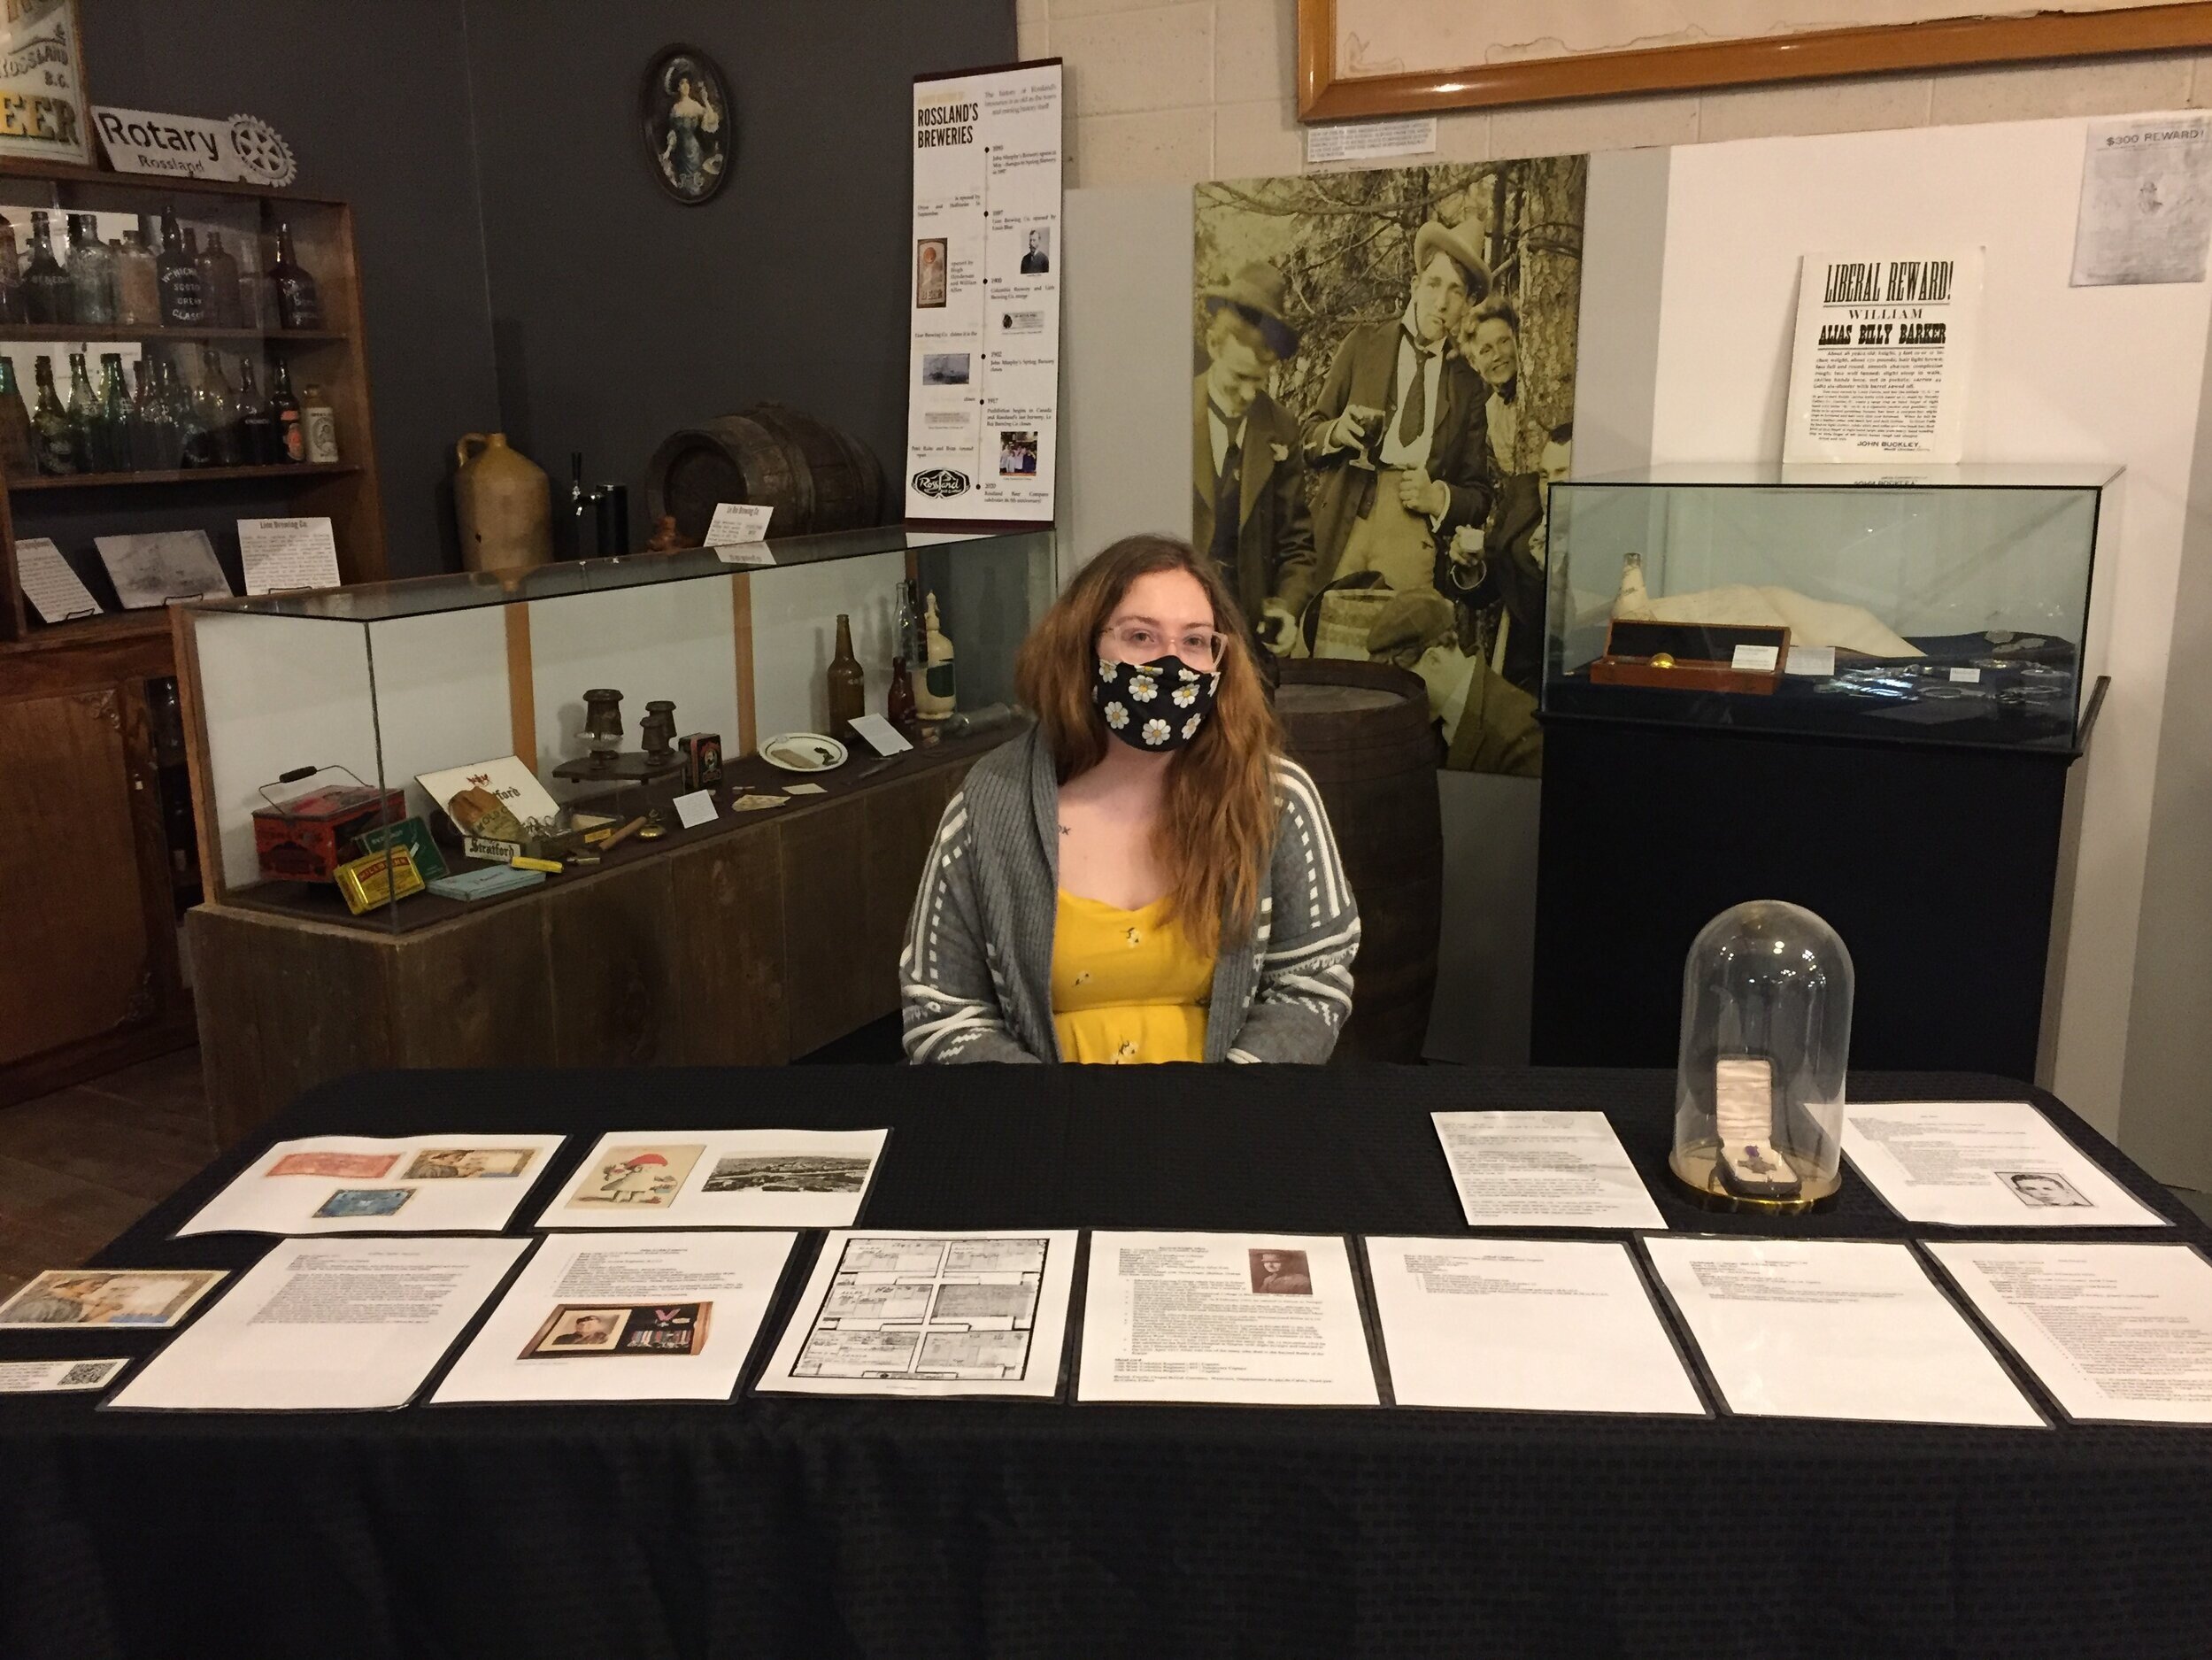 Archives Assistant Elena Enns with her project